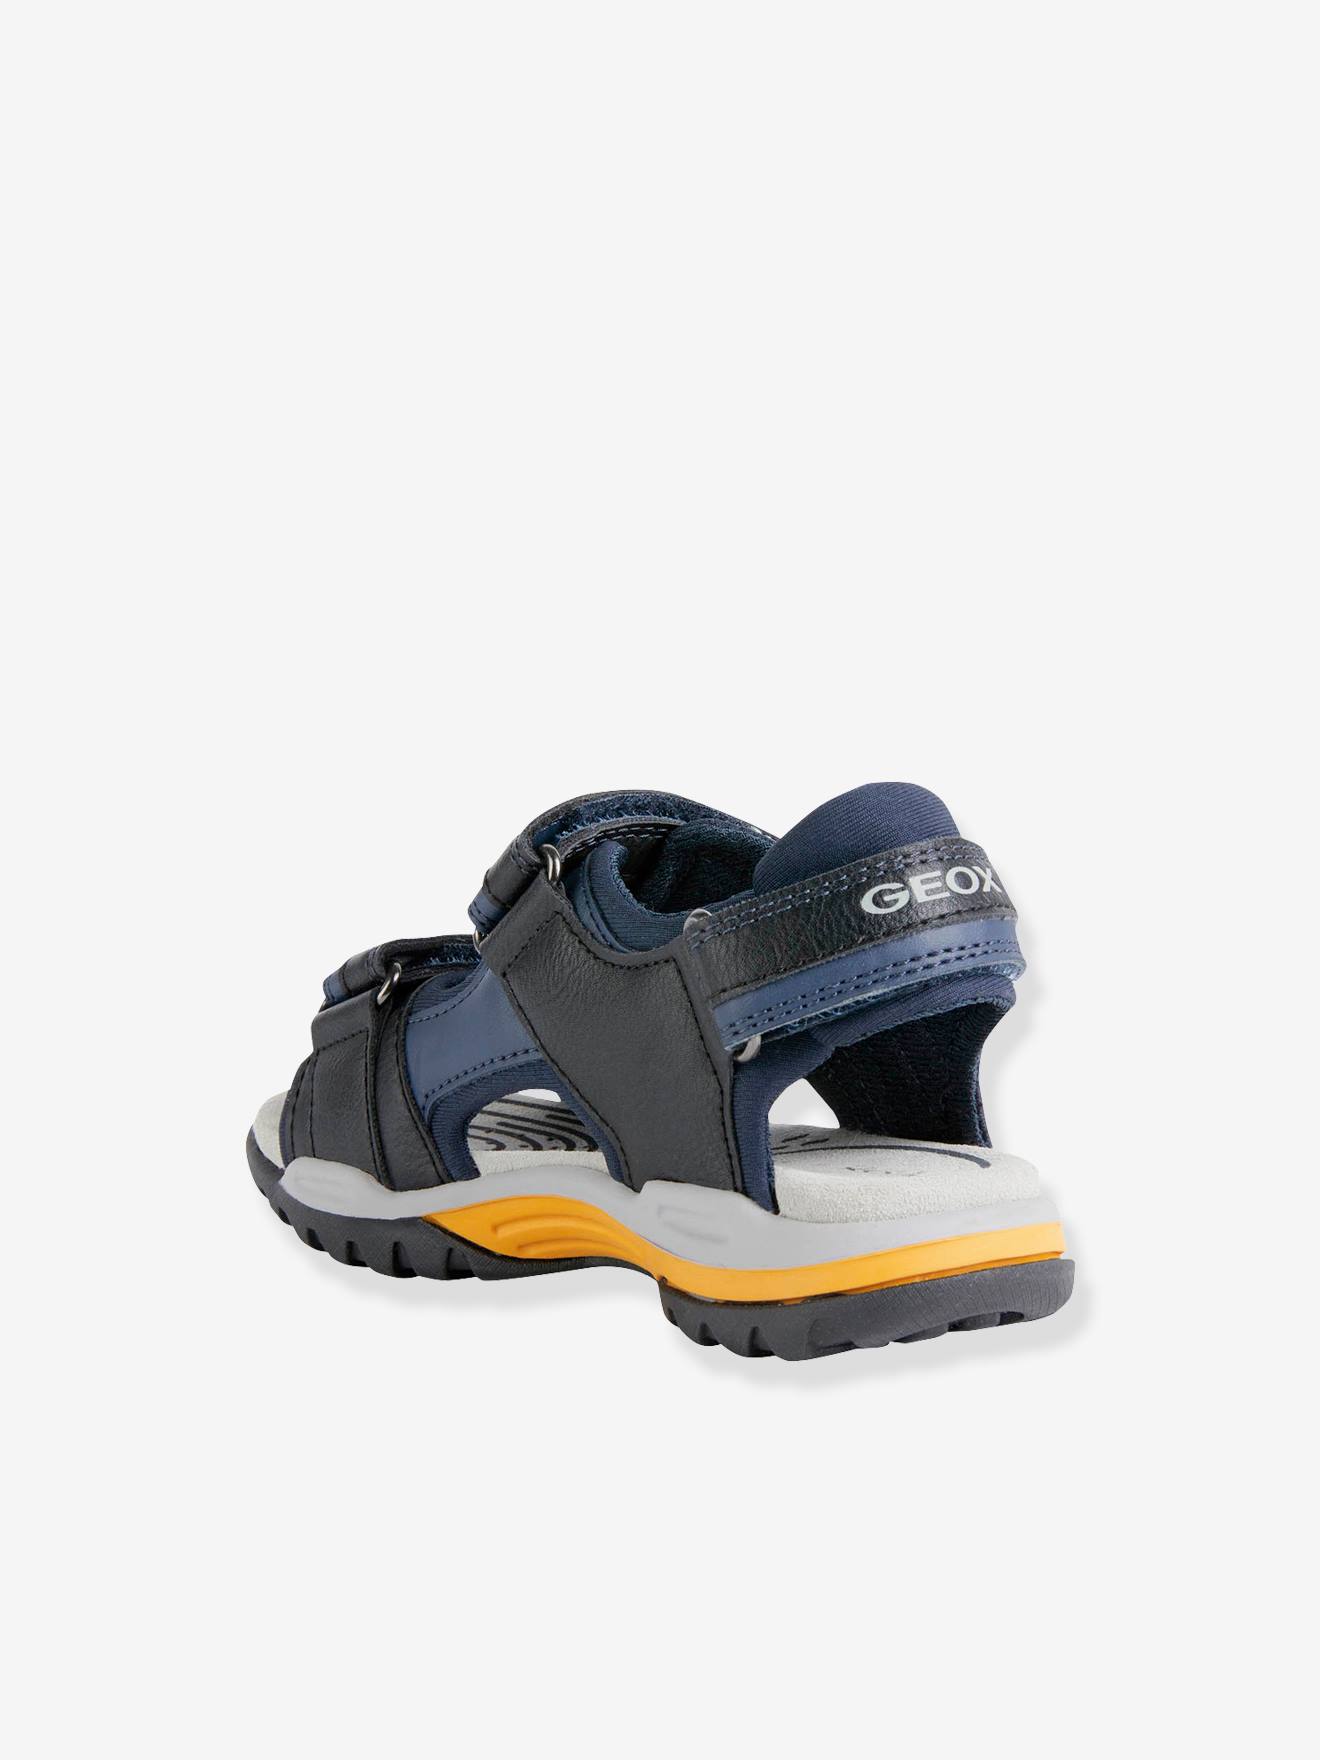 Sandals for Boys, J. Borealis blue Shoes by medium - GEOX® B.A solid